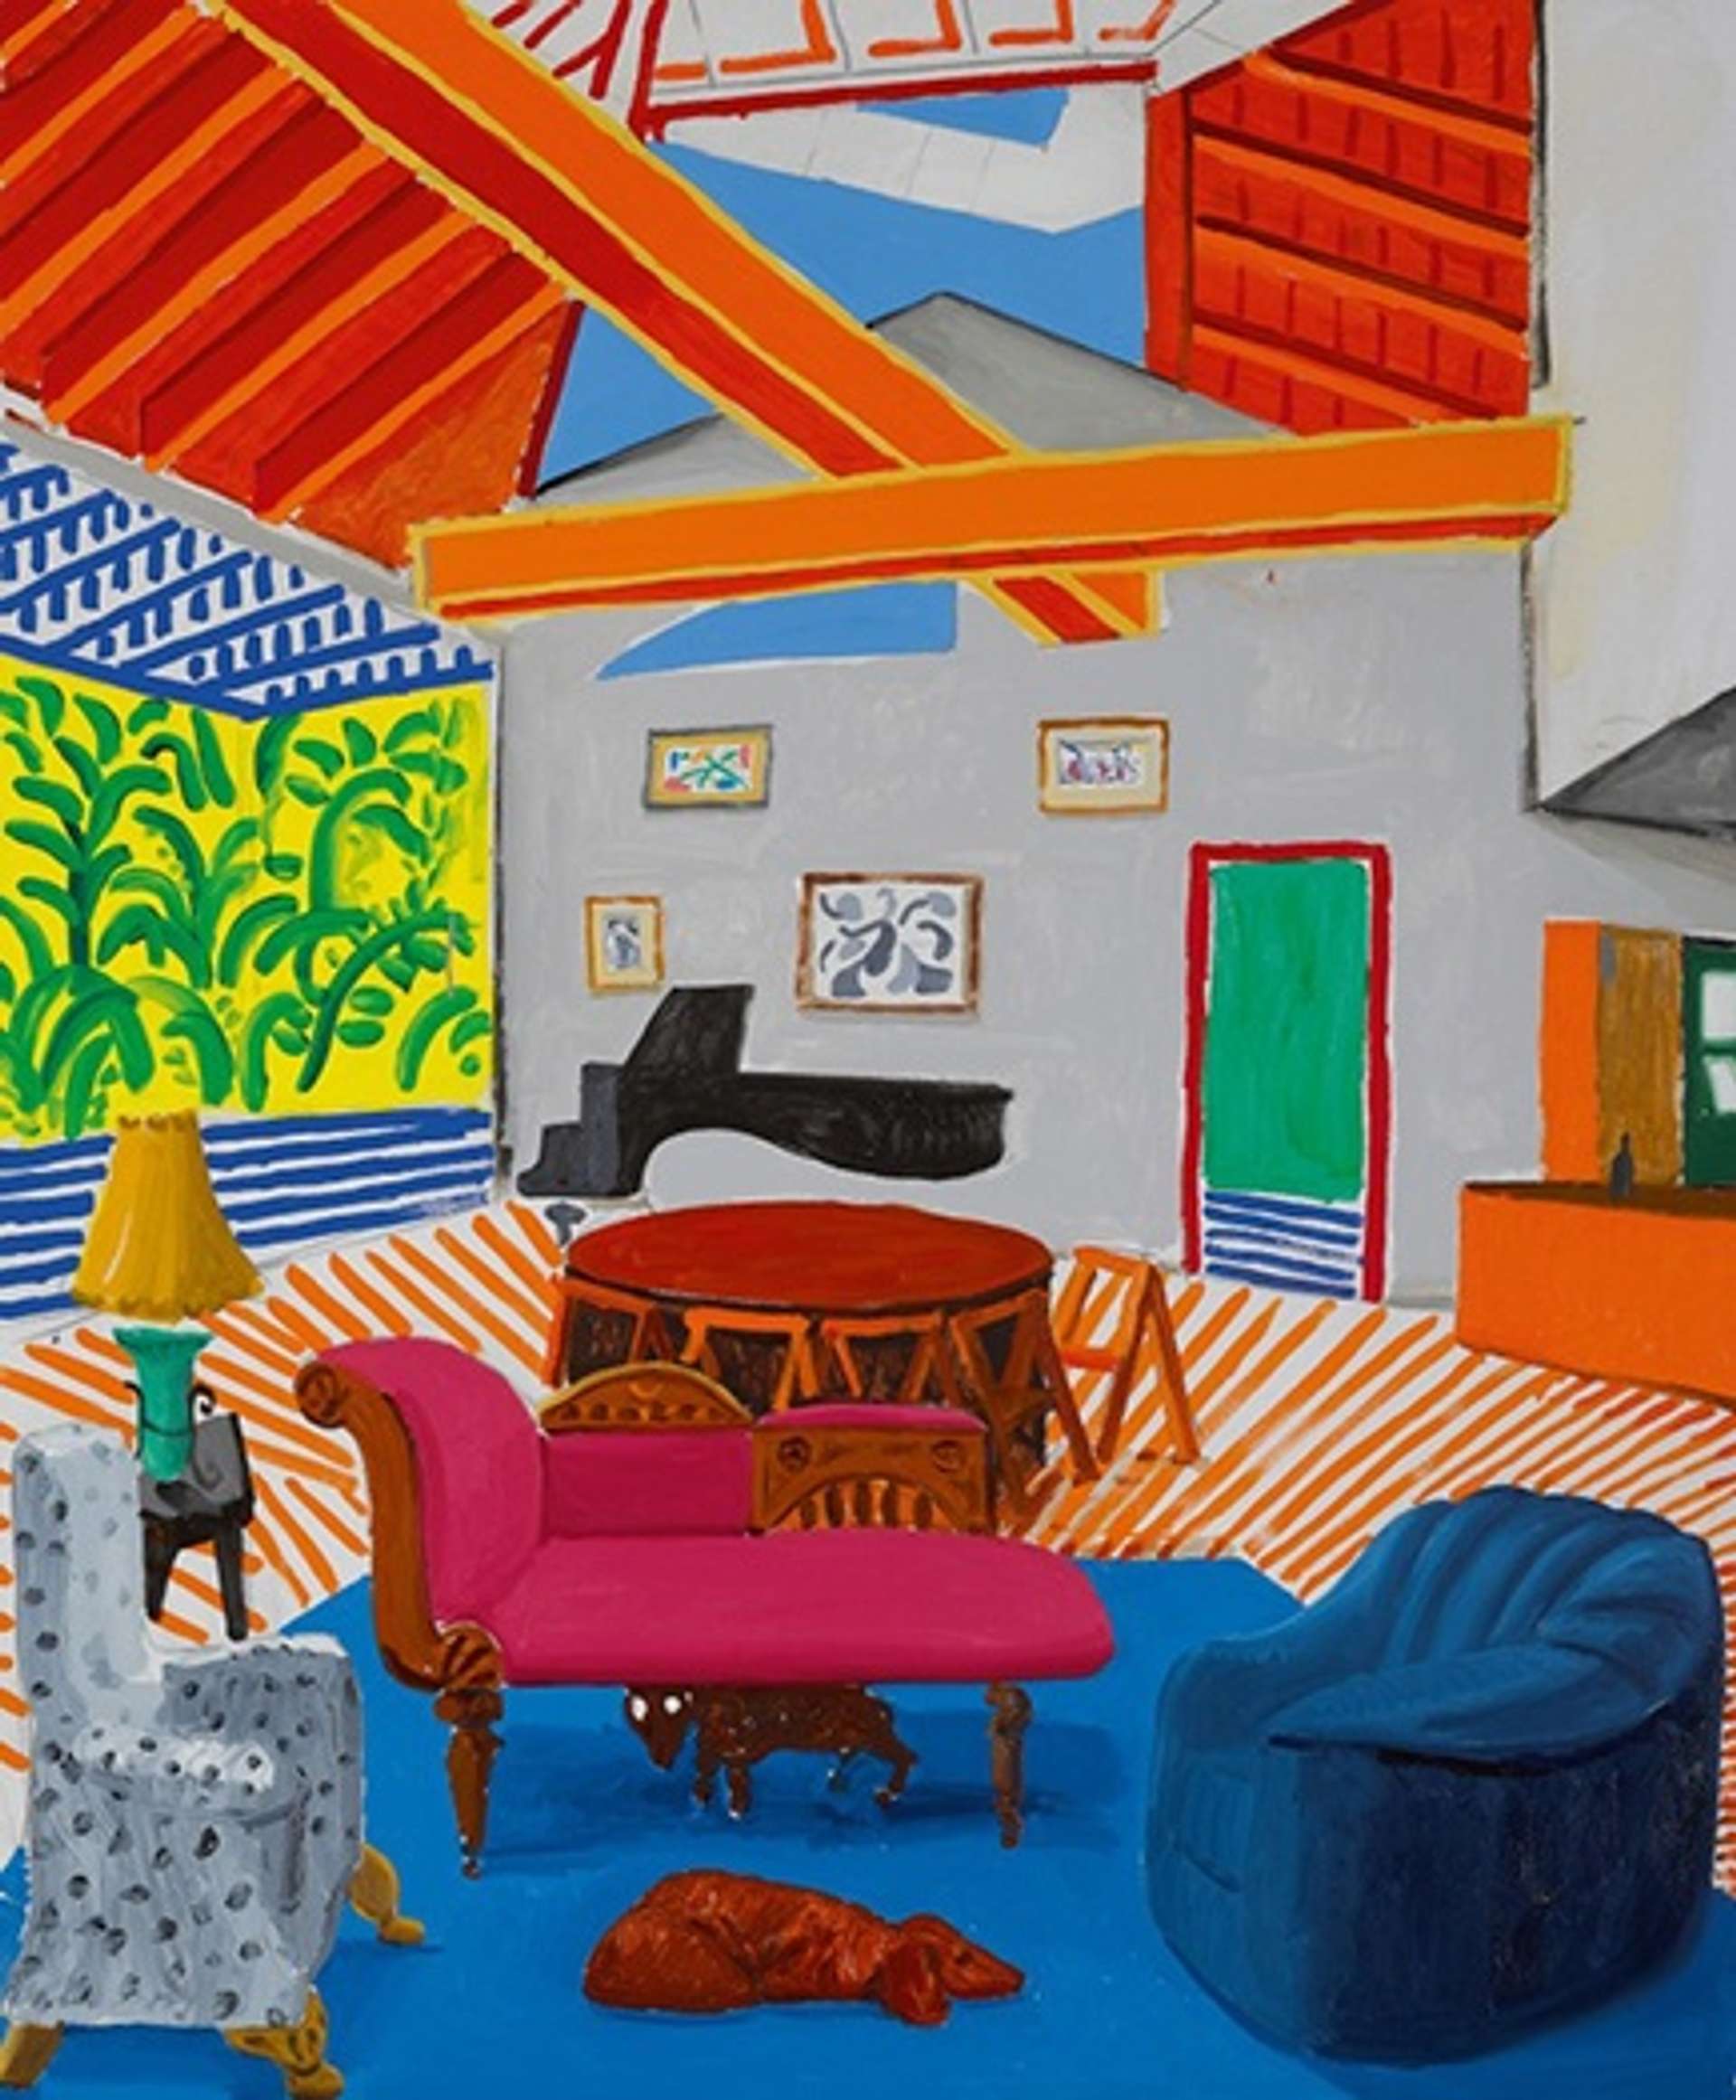 Montcalm Interior With 2 Dogs by David Hockney